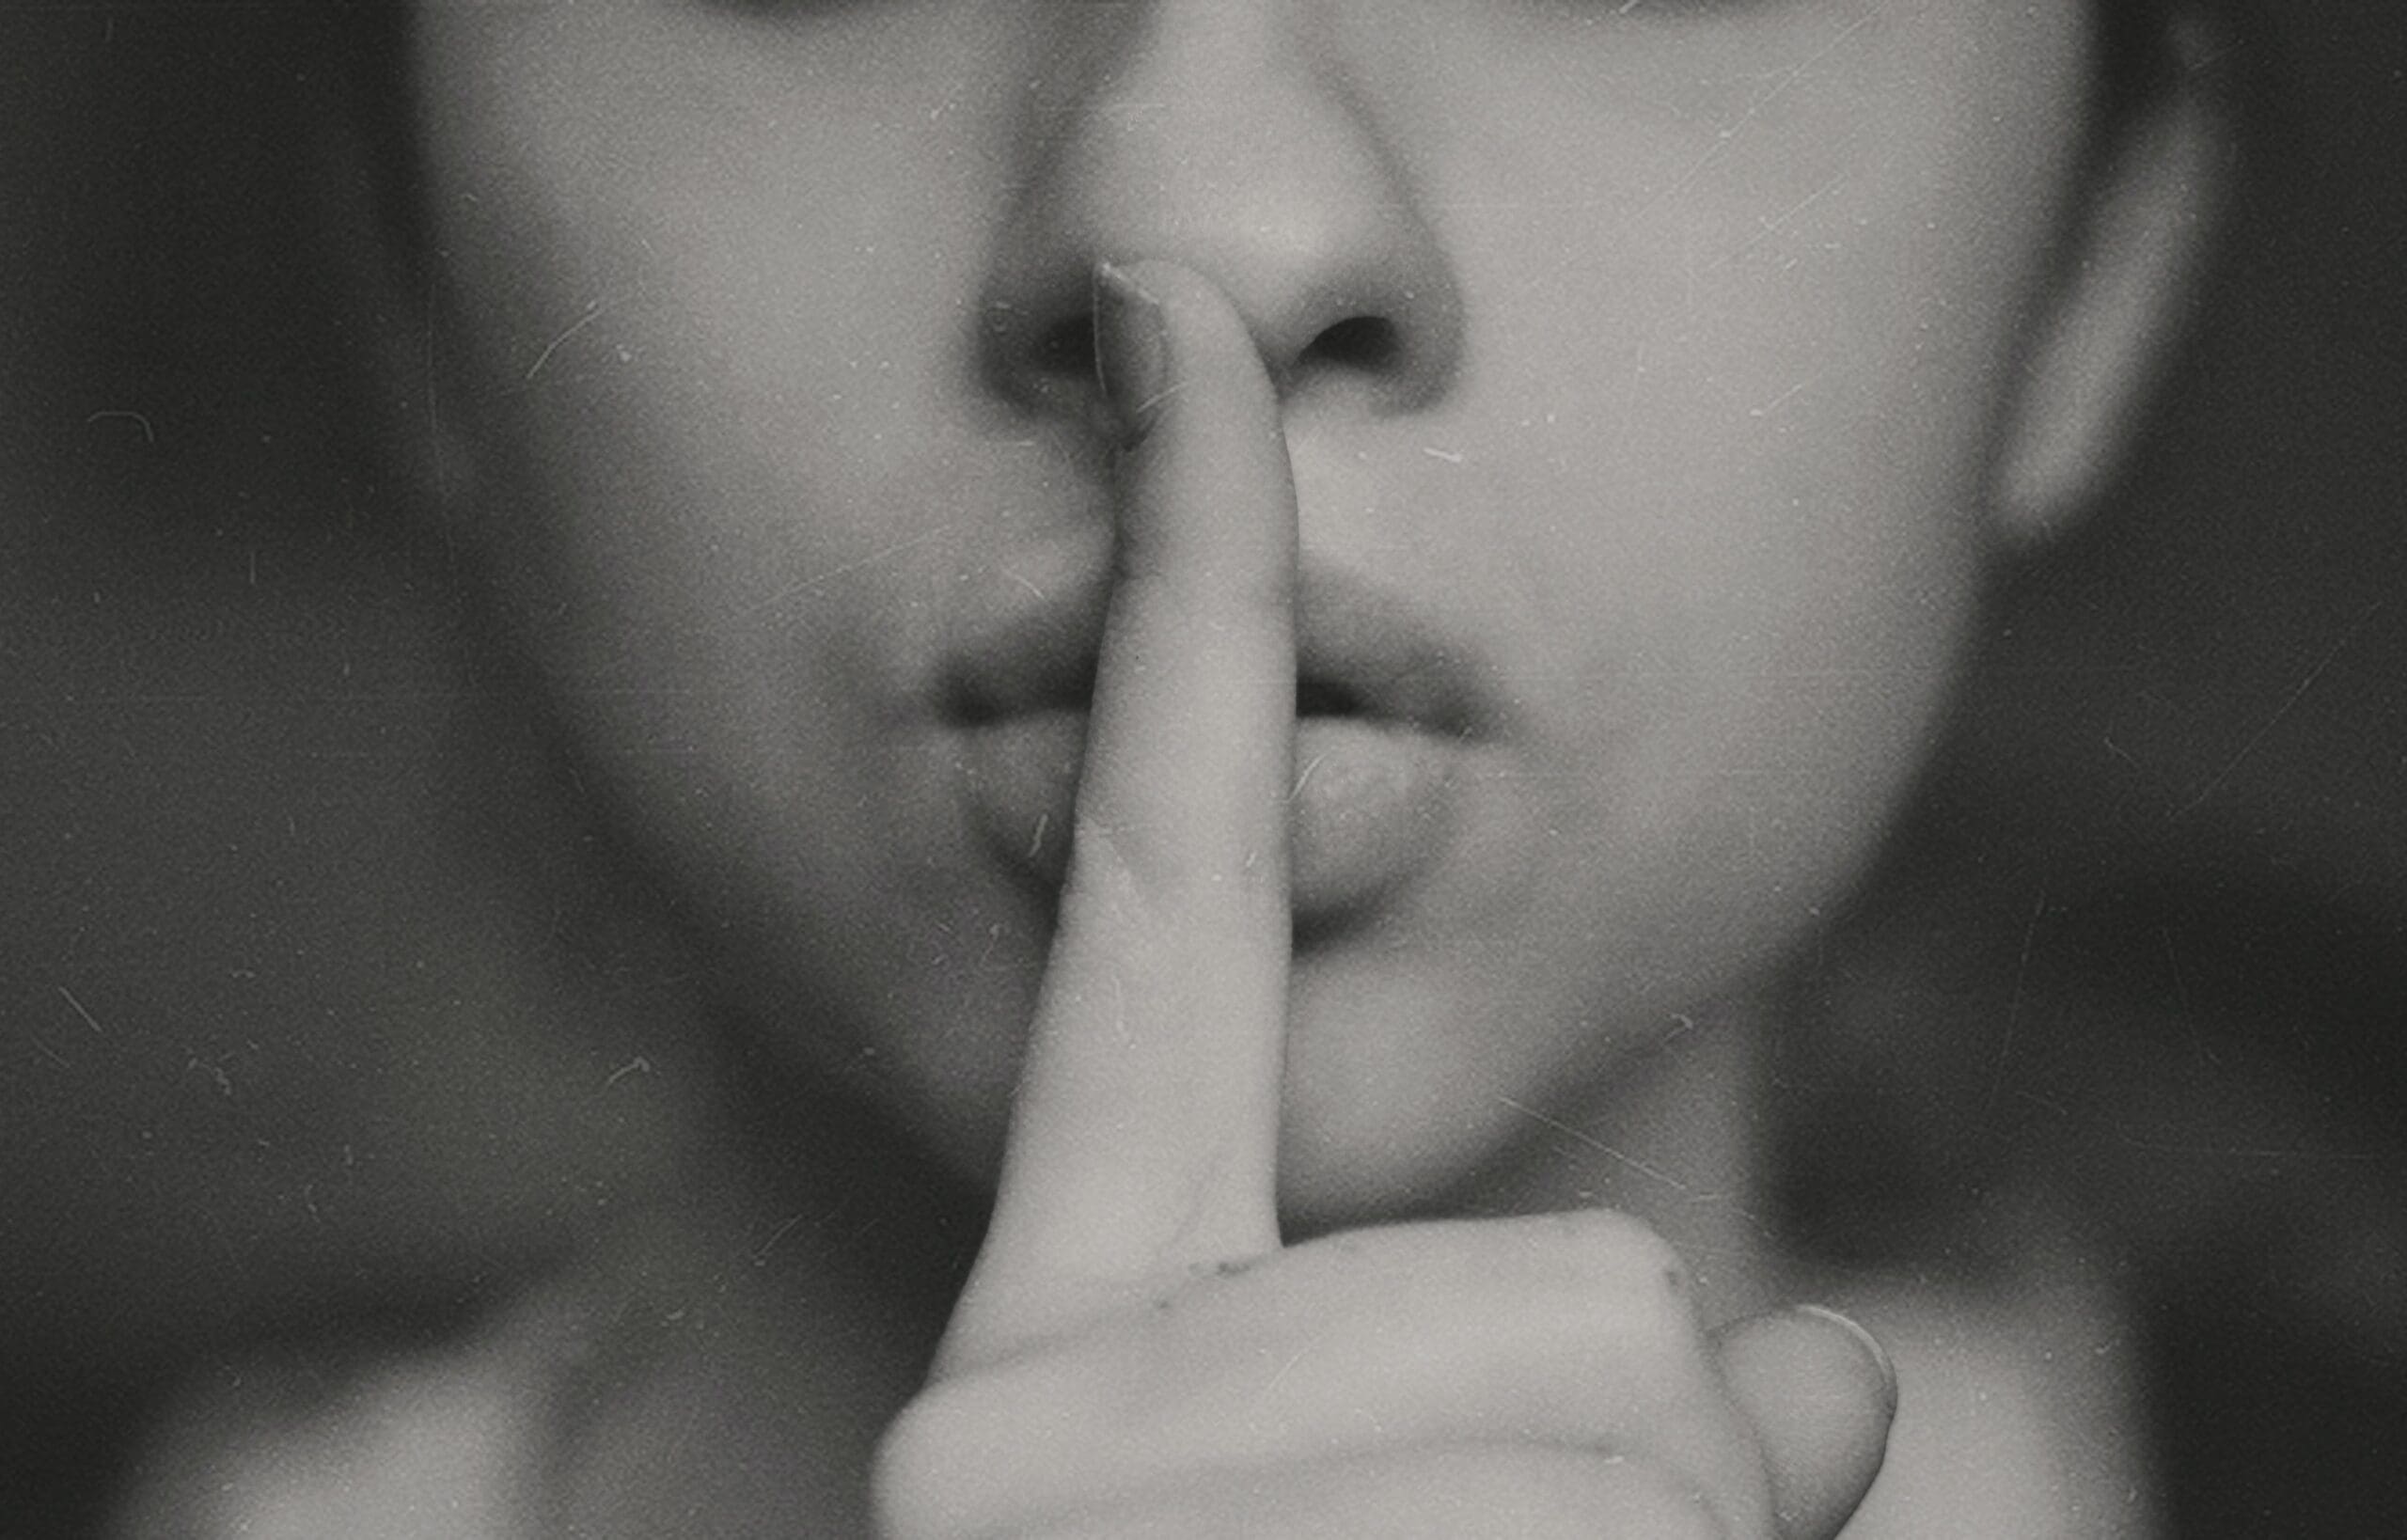 A close up portrait from the nose down of a young woman with her pointing finger over her lips. She's shushing someone.